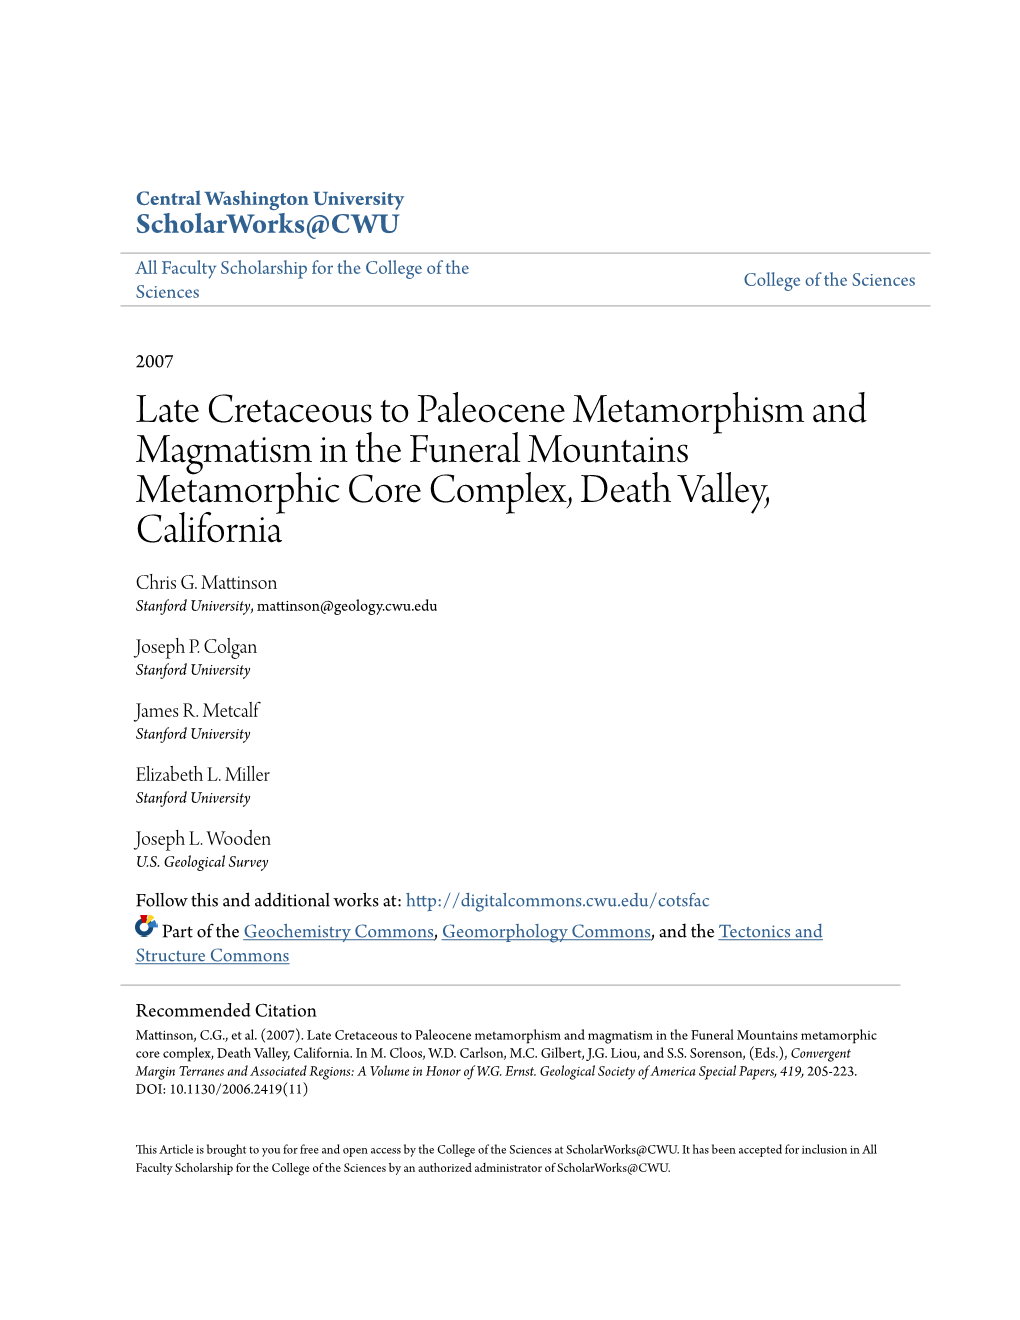 Late Cretaceous to Paleocene Metamorphism and Magmatism in the Funeral Mountains Metamorphic Core Complex, Death Valley, California Chris G